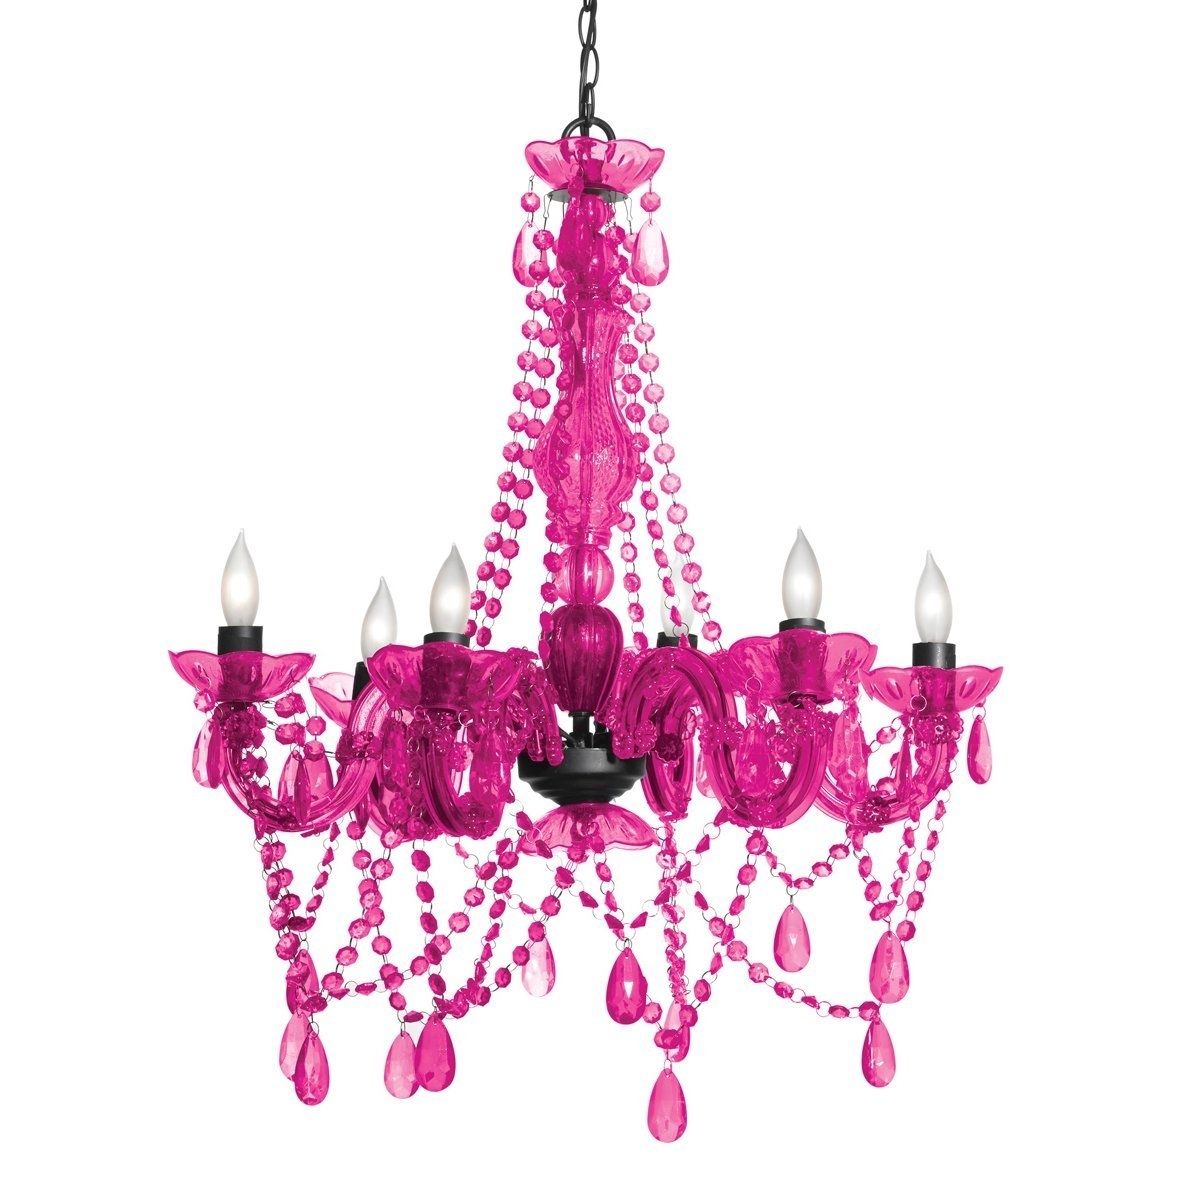 Affordable Chandeliers For Girls To Teens' Rooms In Well Known Pink Gypsy Chandeliers (View 4 of 15)